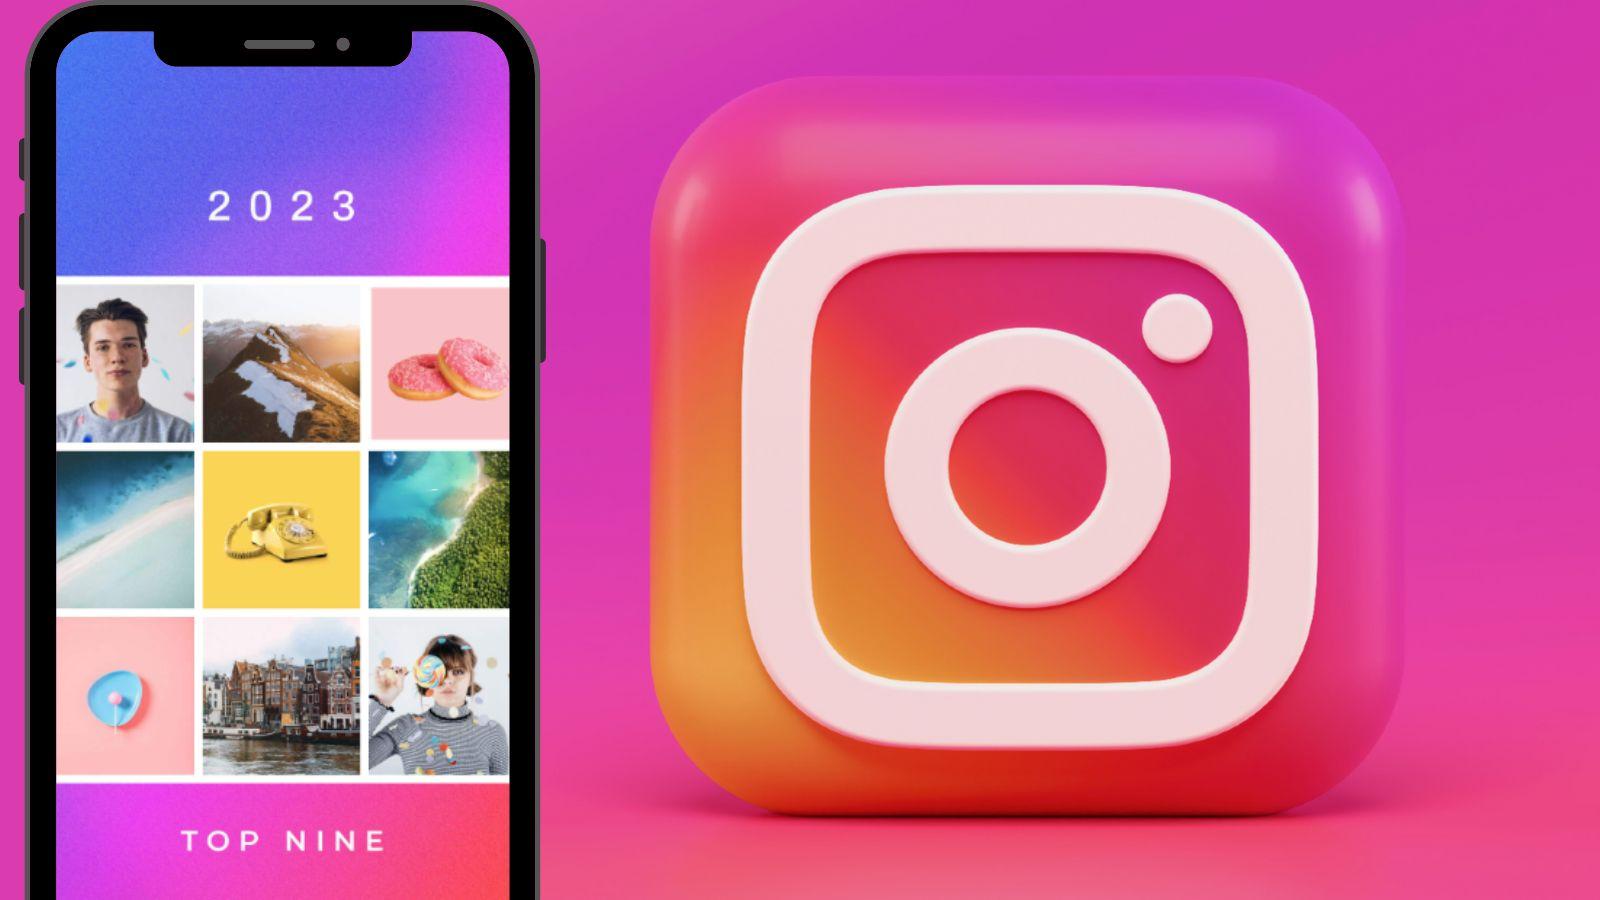 How to get your top 9 on Instagram